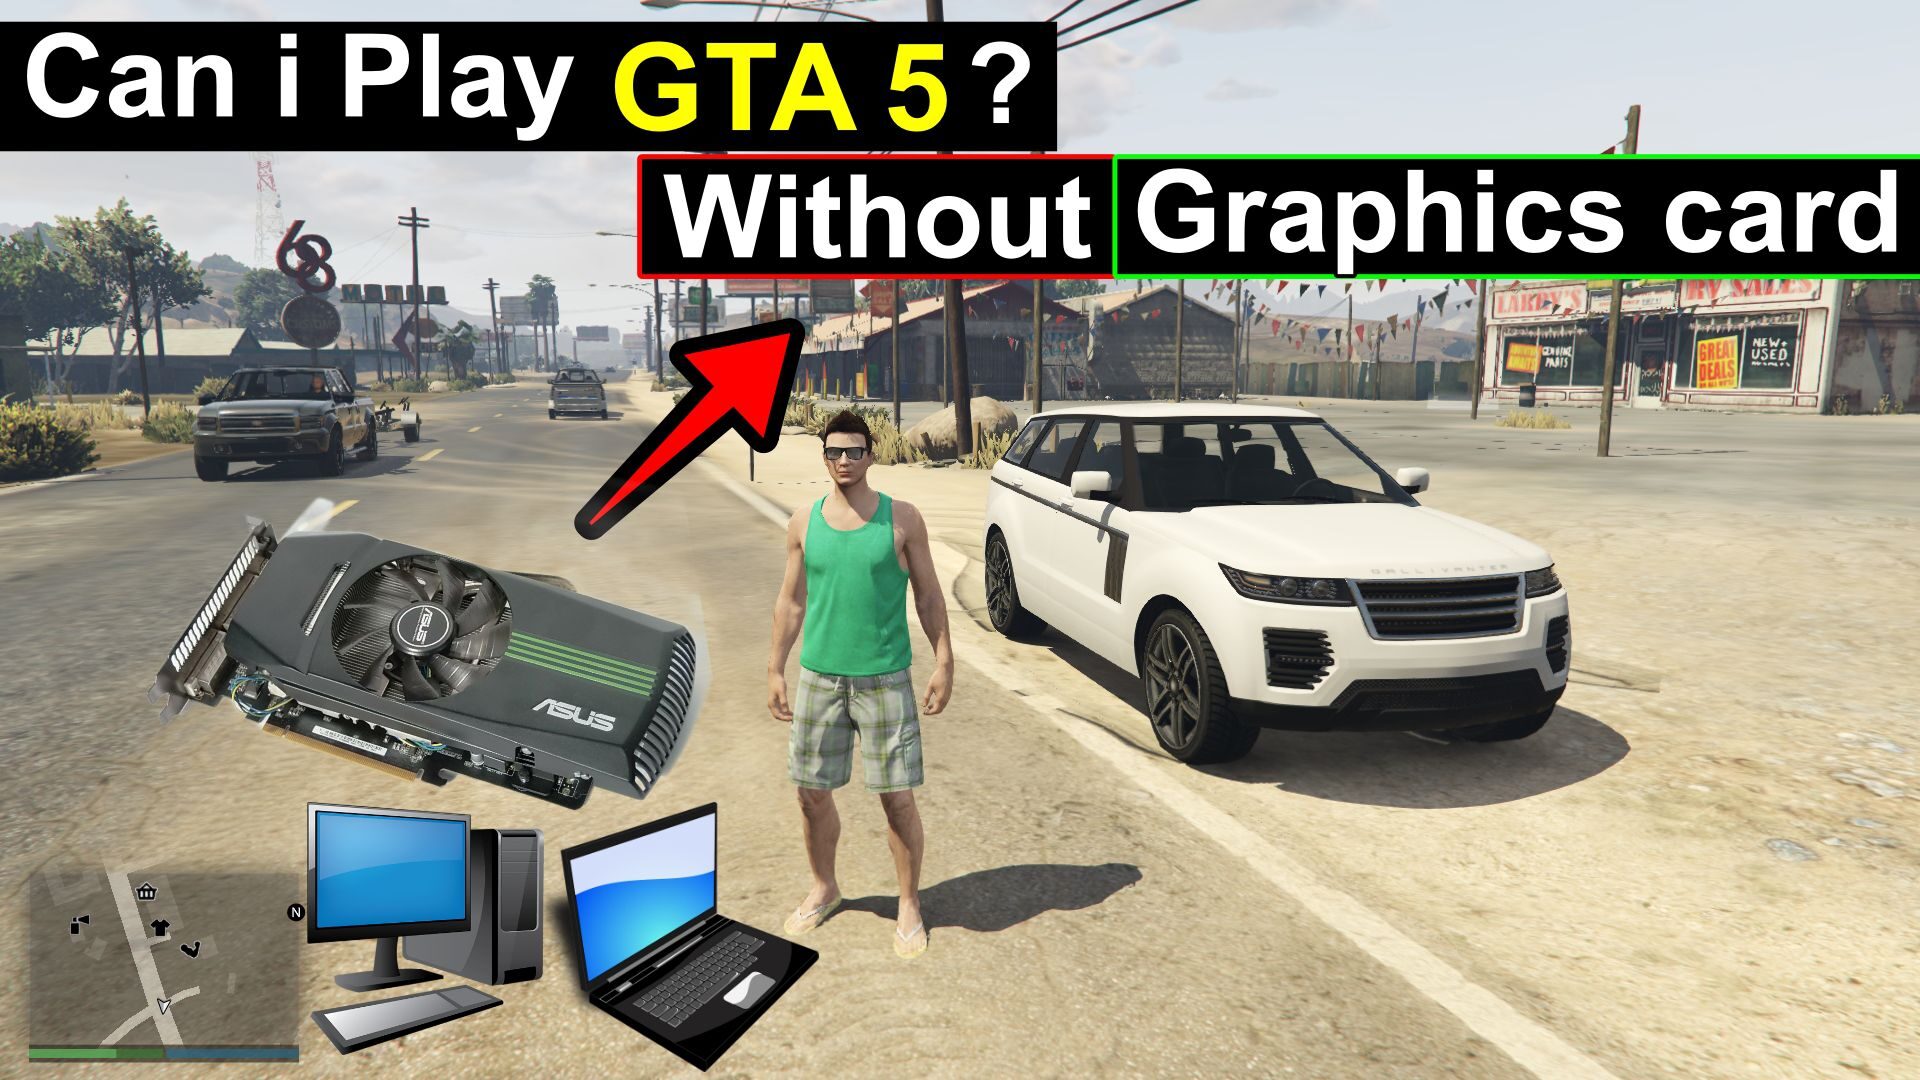 Can I play GTA 5 without a graphics card